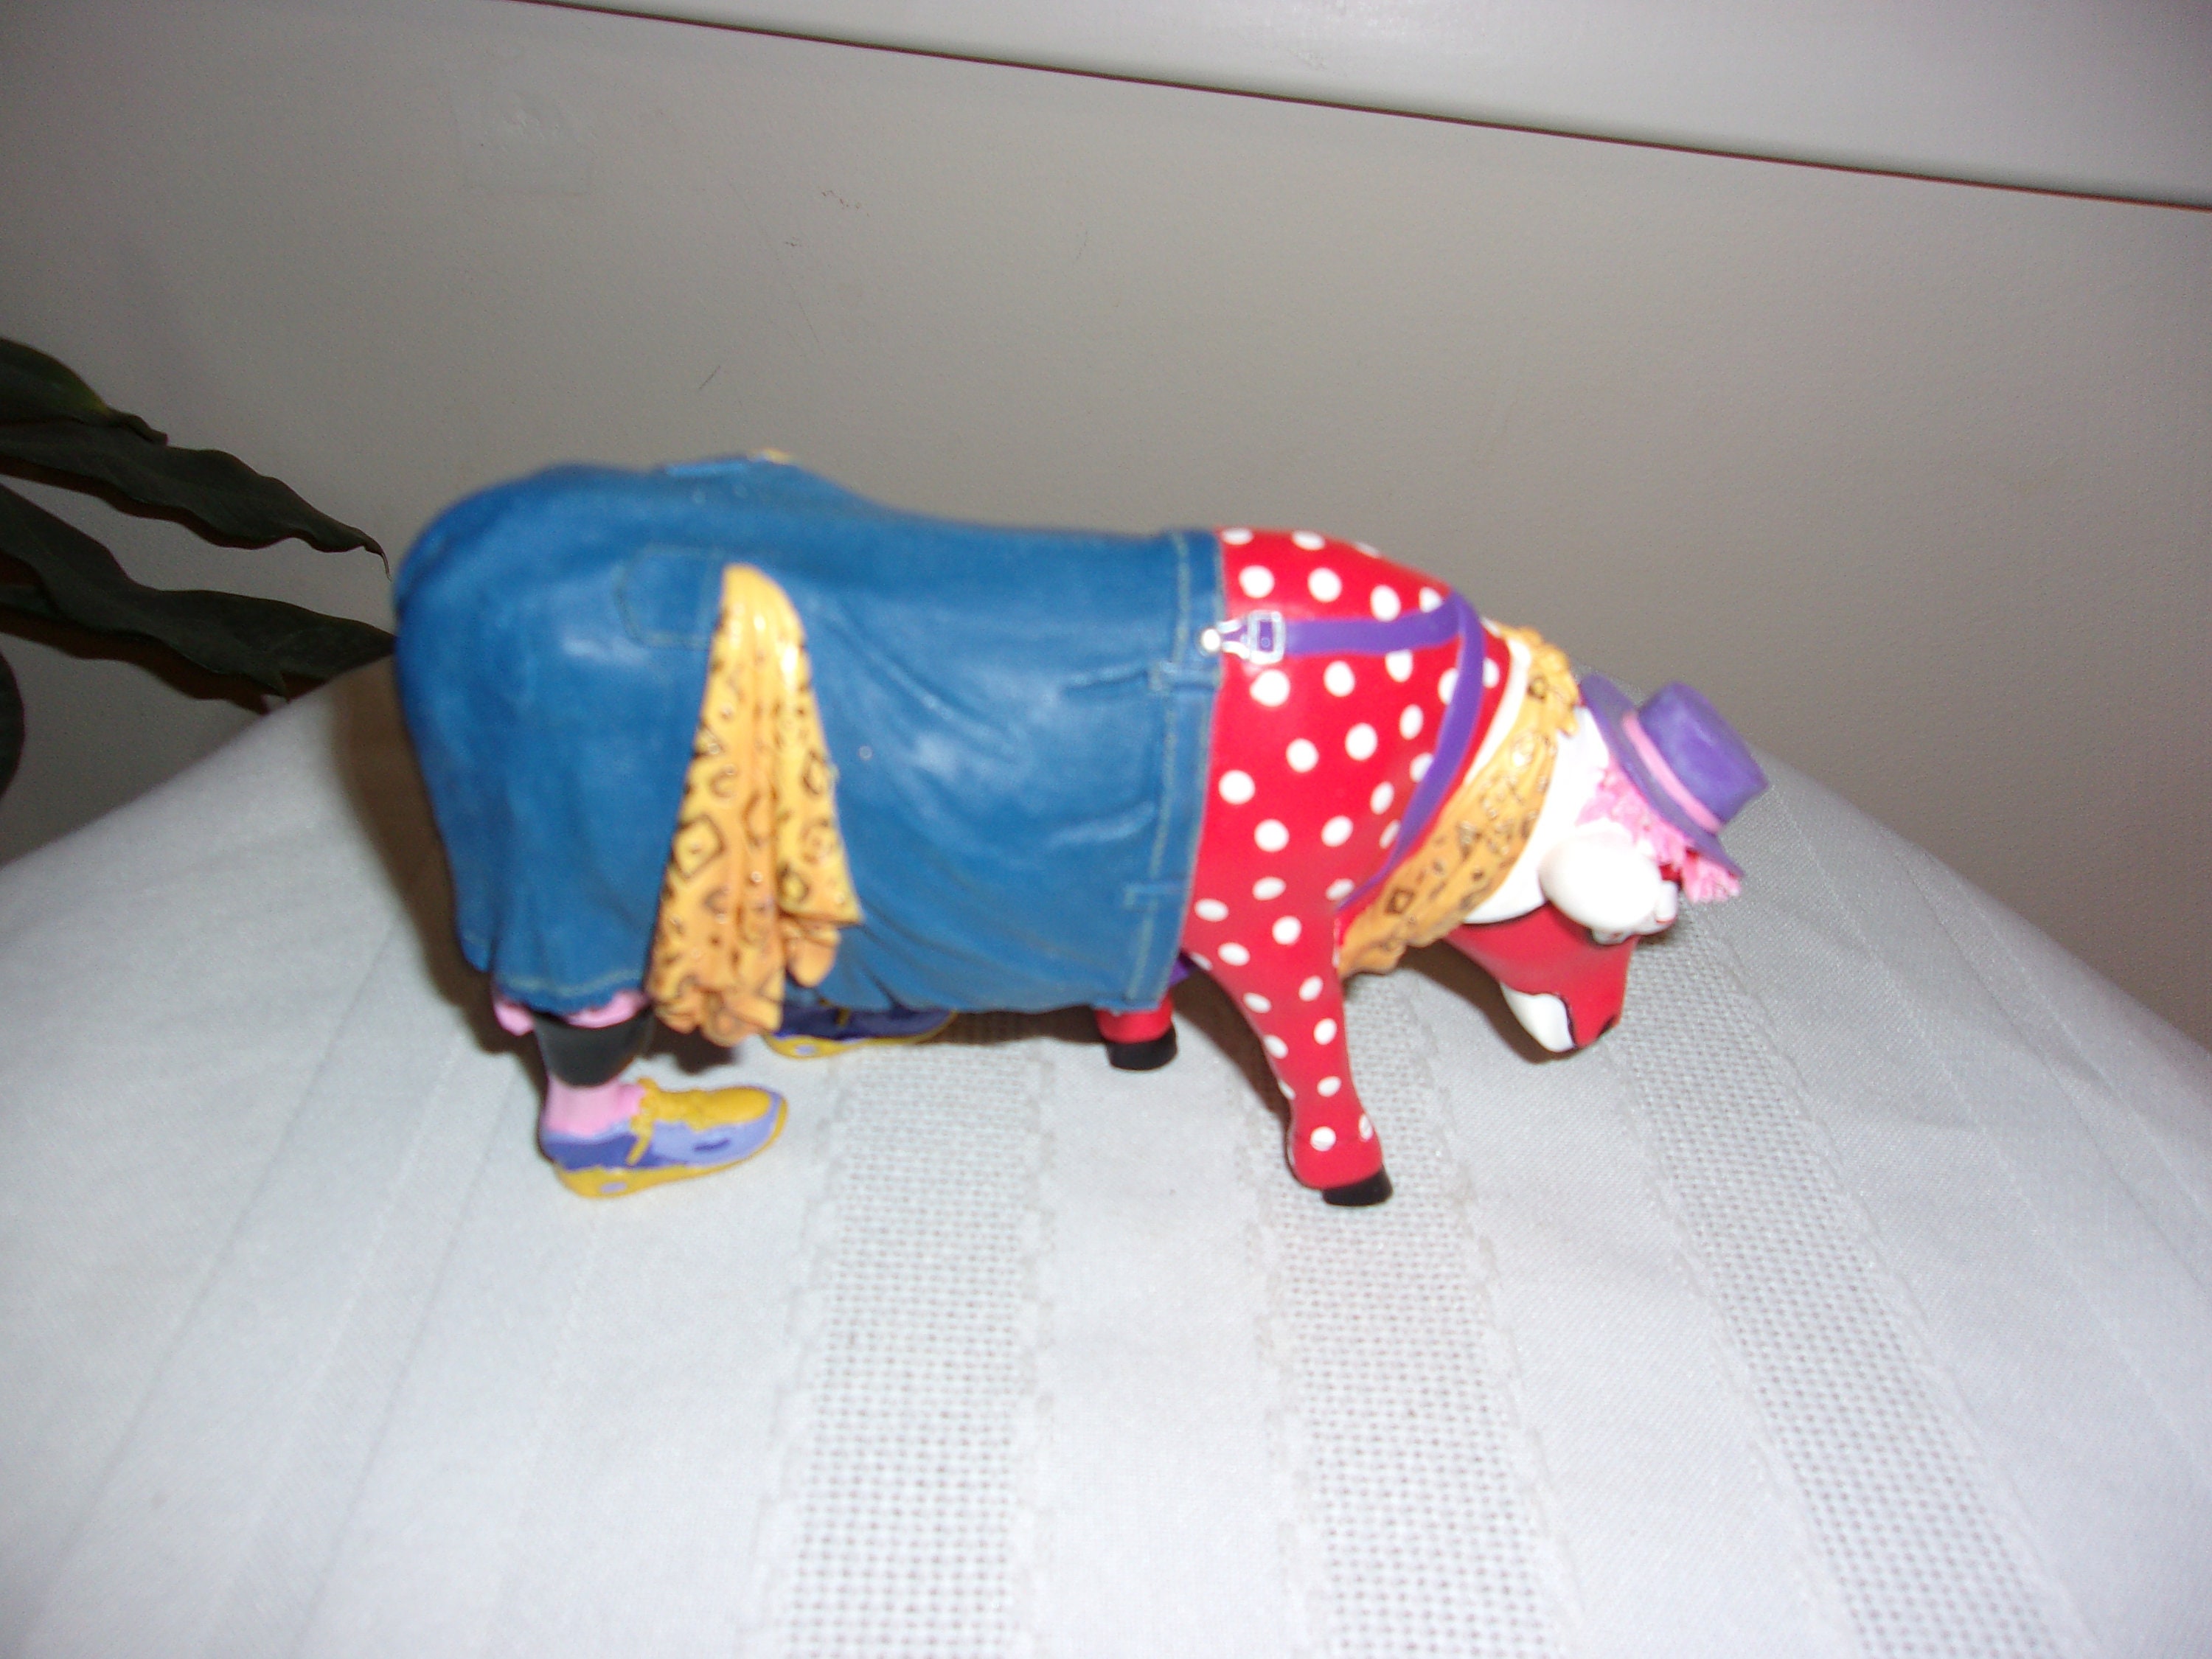 Buy Vintage Ornate Cow Parade Figurine Online in India 